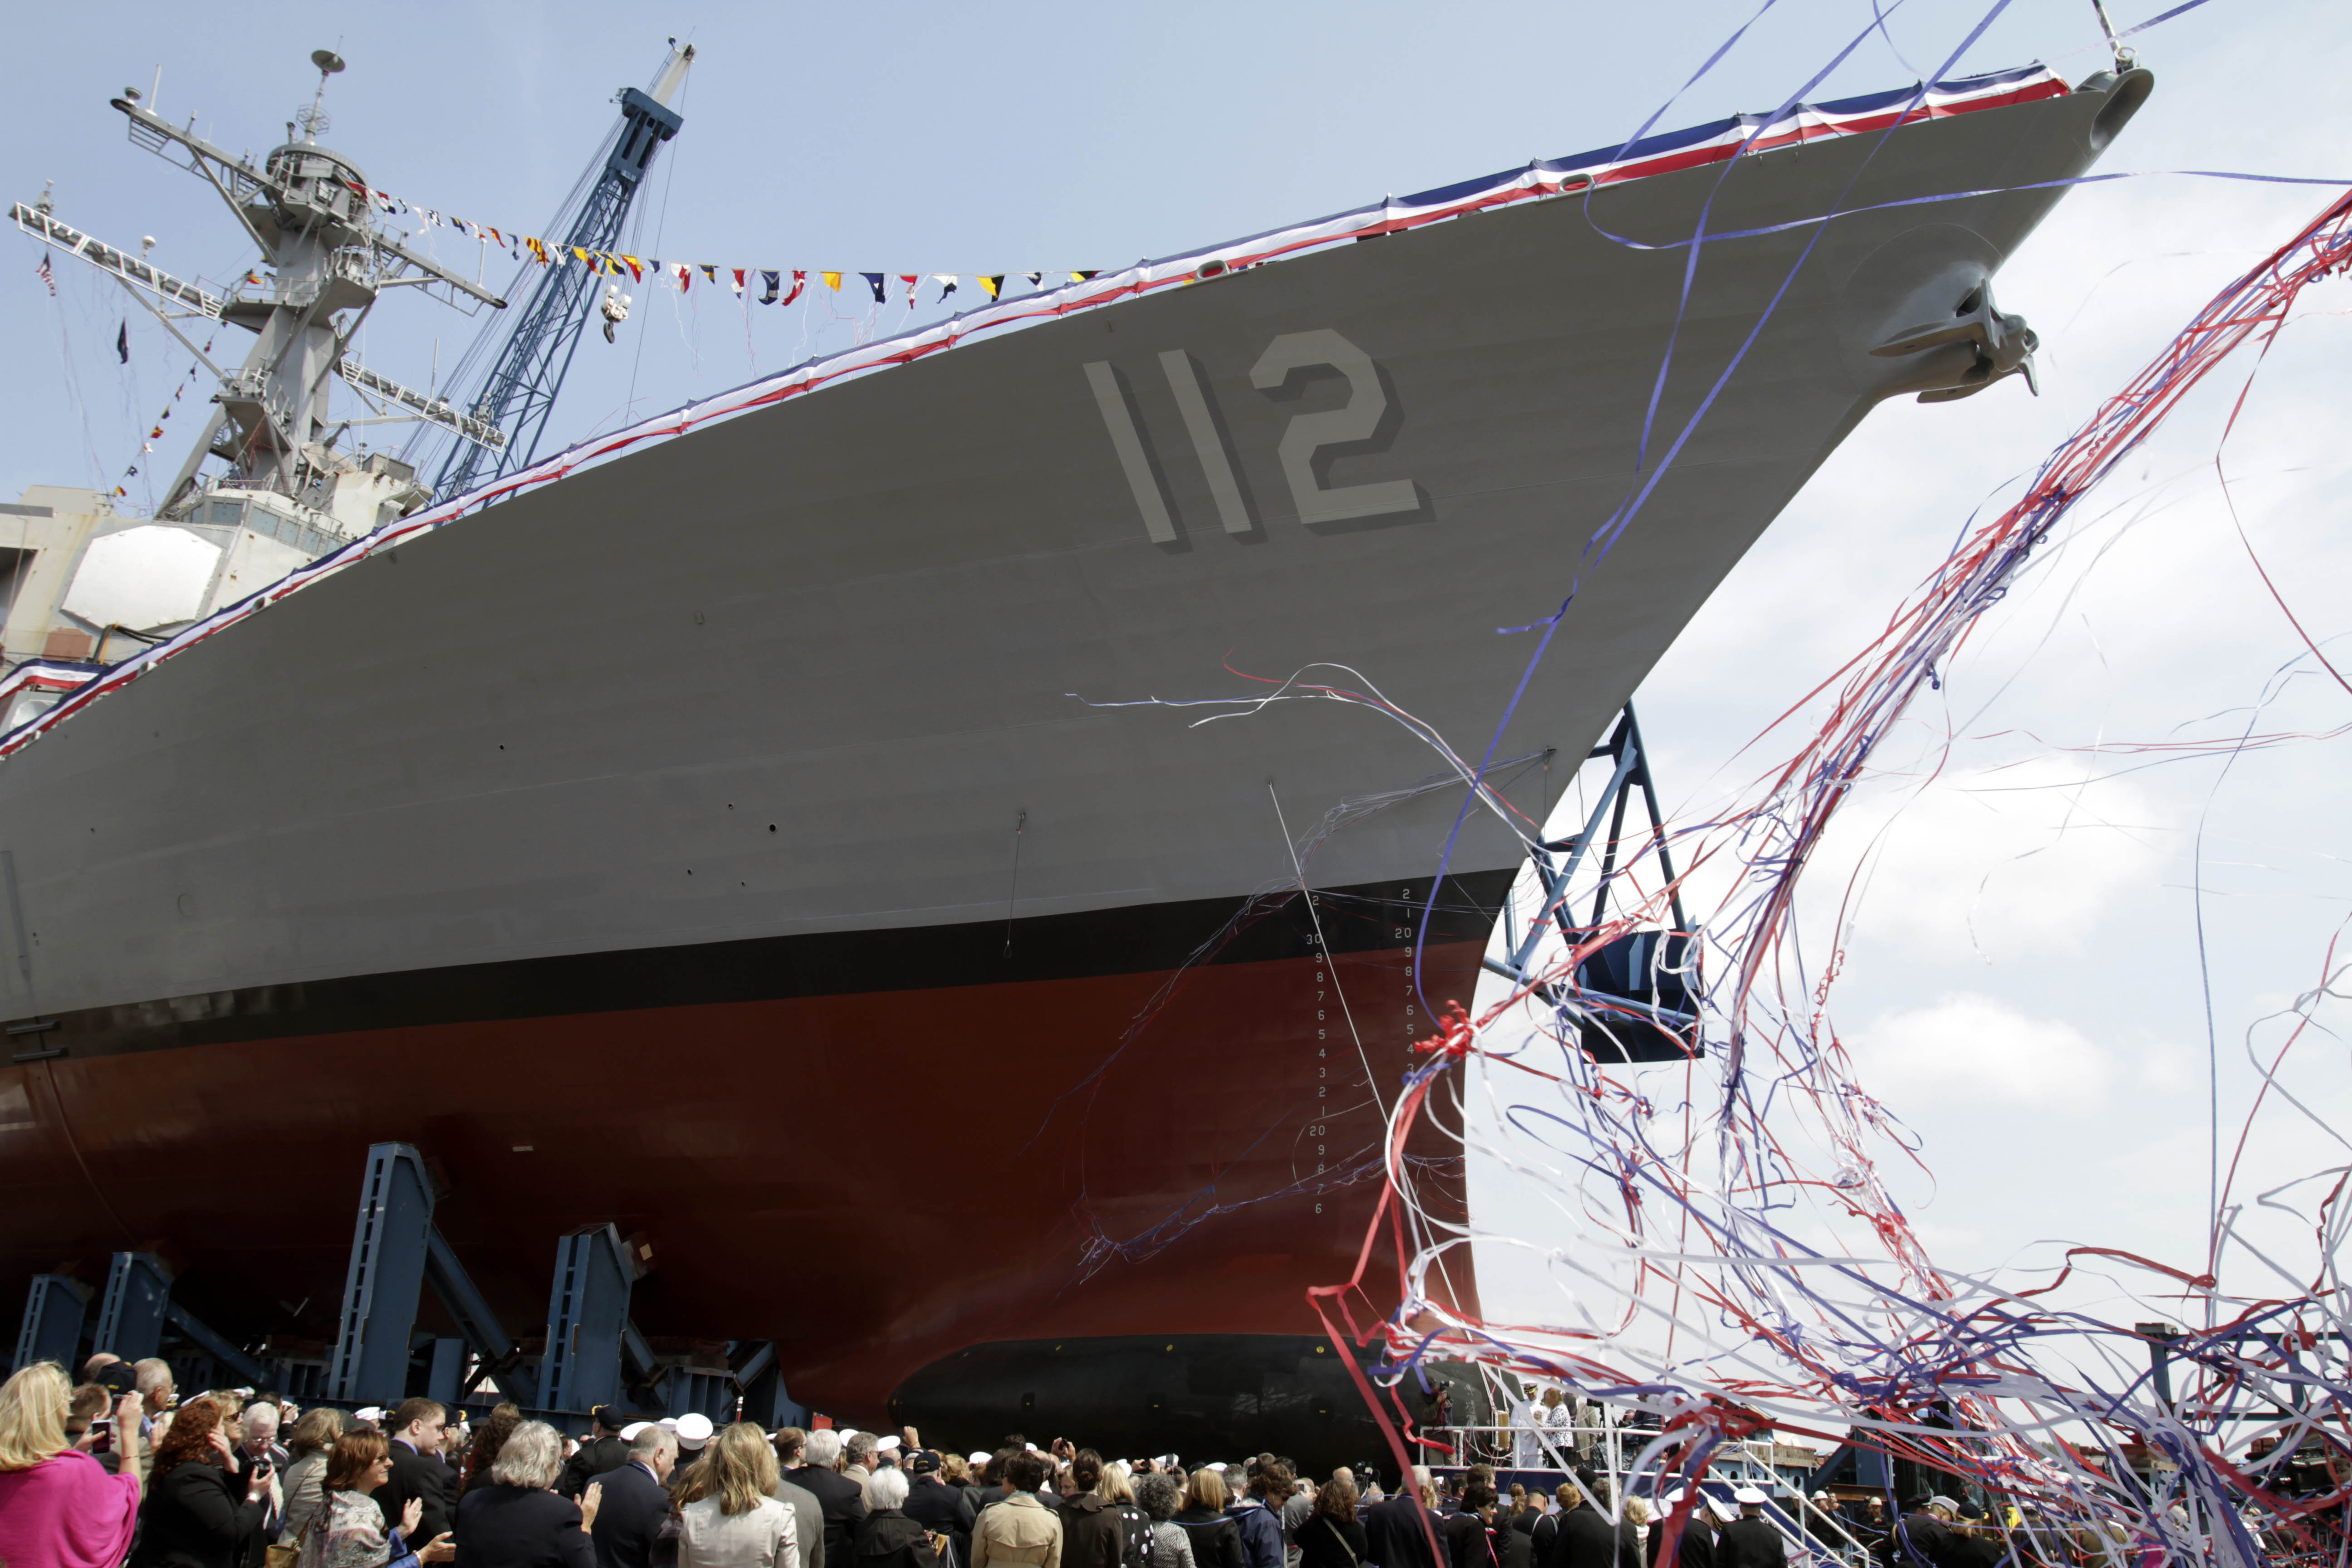 Maureen Murphy, mother of  Medal of Honor recipient and U.S. Navy SEAL, Lt.  Michael Murphy, christens the ship baring his name during a ceremony at the Bath Iron Works shipyard in Bath, Maine on Saturday, May 7, 2011, what would've been Murphy's 35th birthday. The mother of a Navy SEAL from Maine killed in Afghanistan said "Happy birthday, baby" before smashing a bottle of Champagne against a Navy ship that bears her son's name. (AP Photo/Pat Wellenbach)